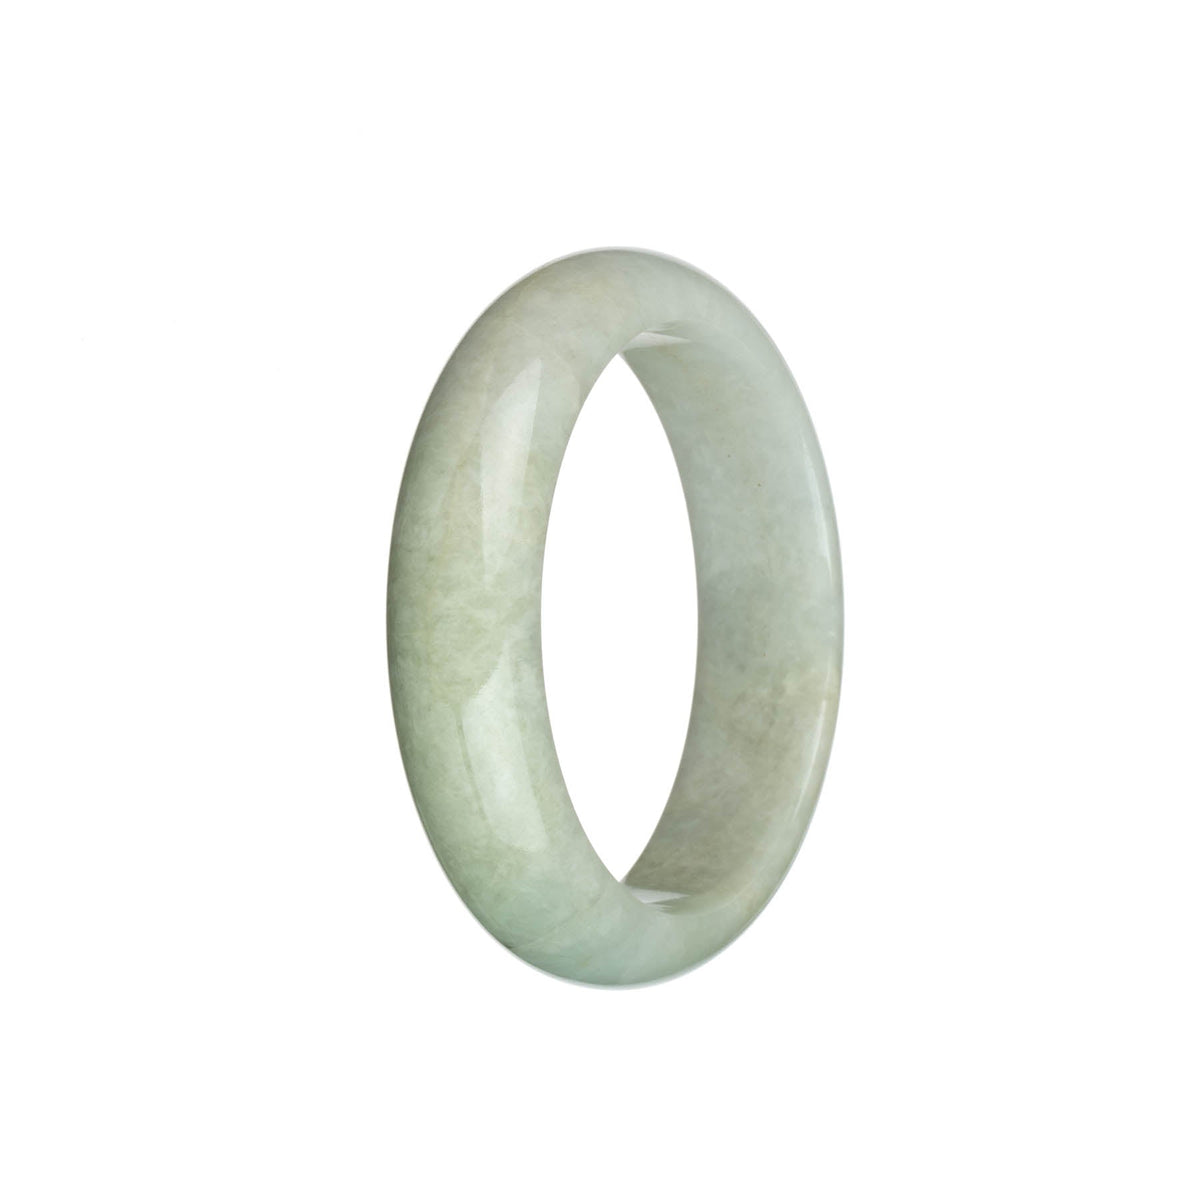 Certified Grade A Pale Green and White Jadeite Bangle Bracelet - 56mm Half Moon